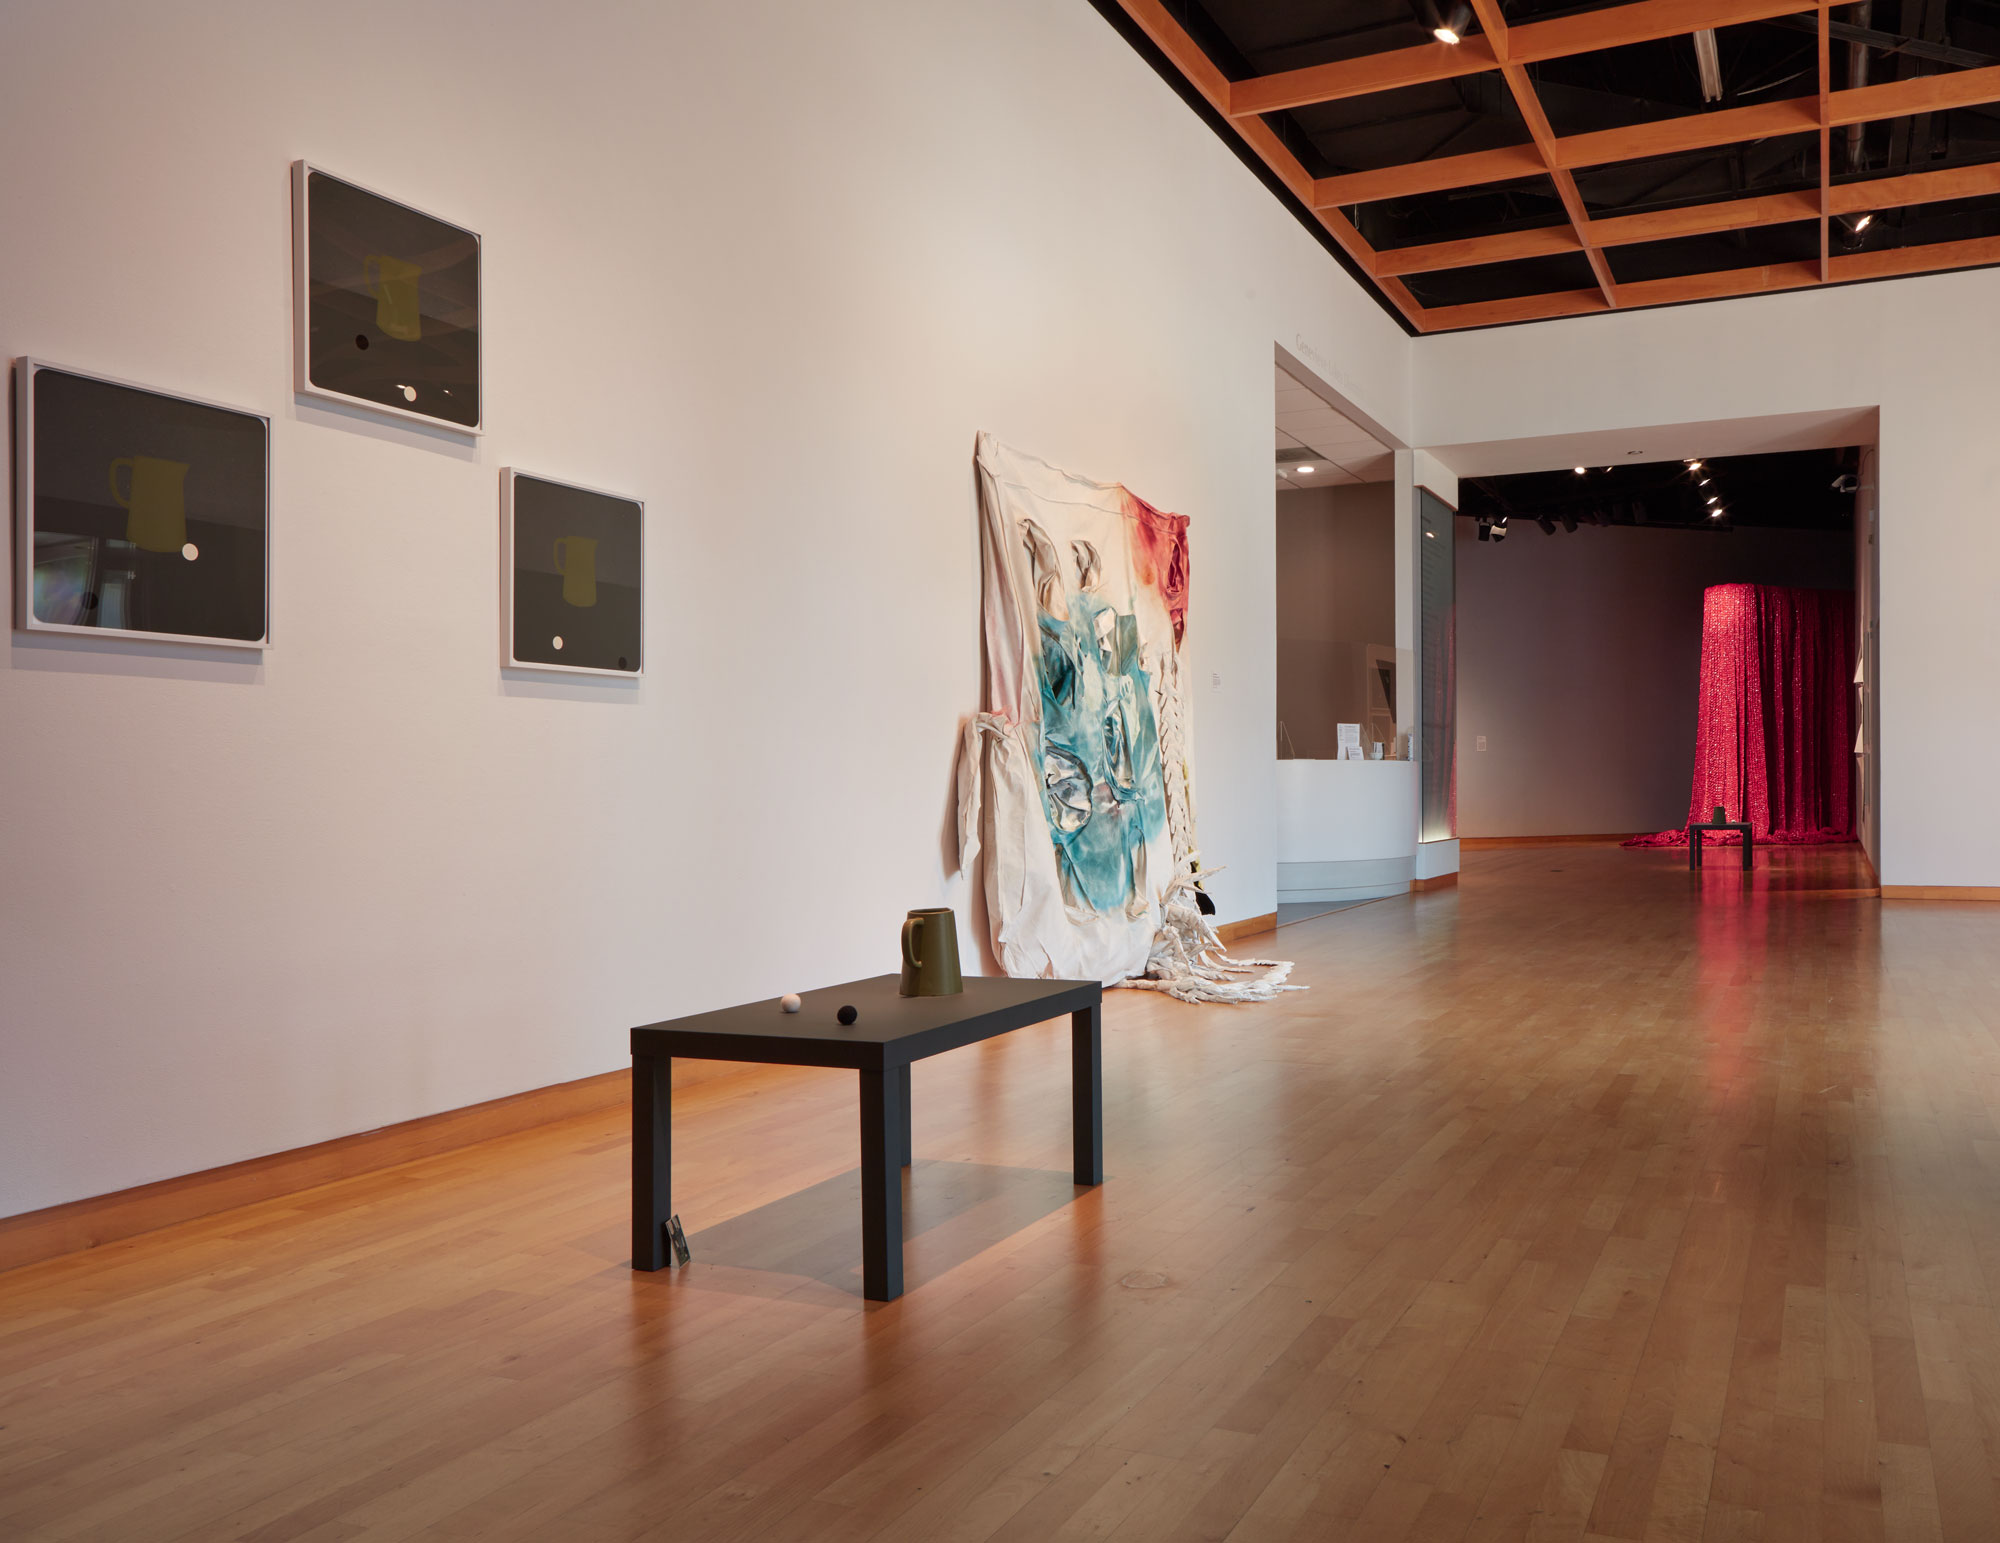 Installation view of Skyway 20/21 exhibition at USF Contemporary Art Museum. Left to right: works by Ry McCollough, Casey McDonough, and Aikiko Kotani. Photo: Will Lytch.